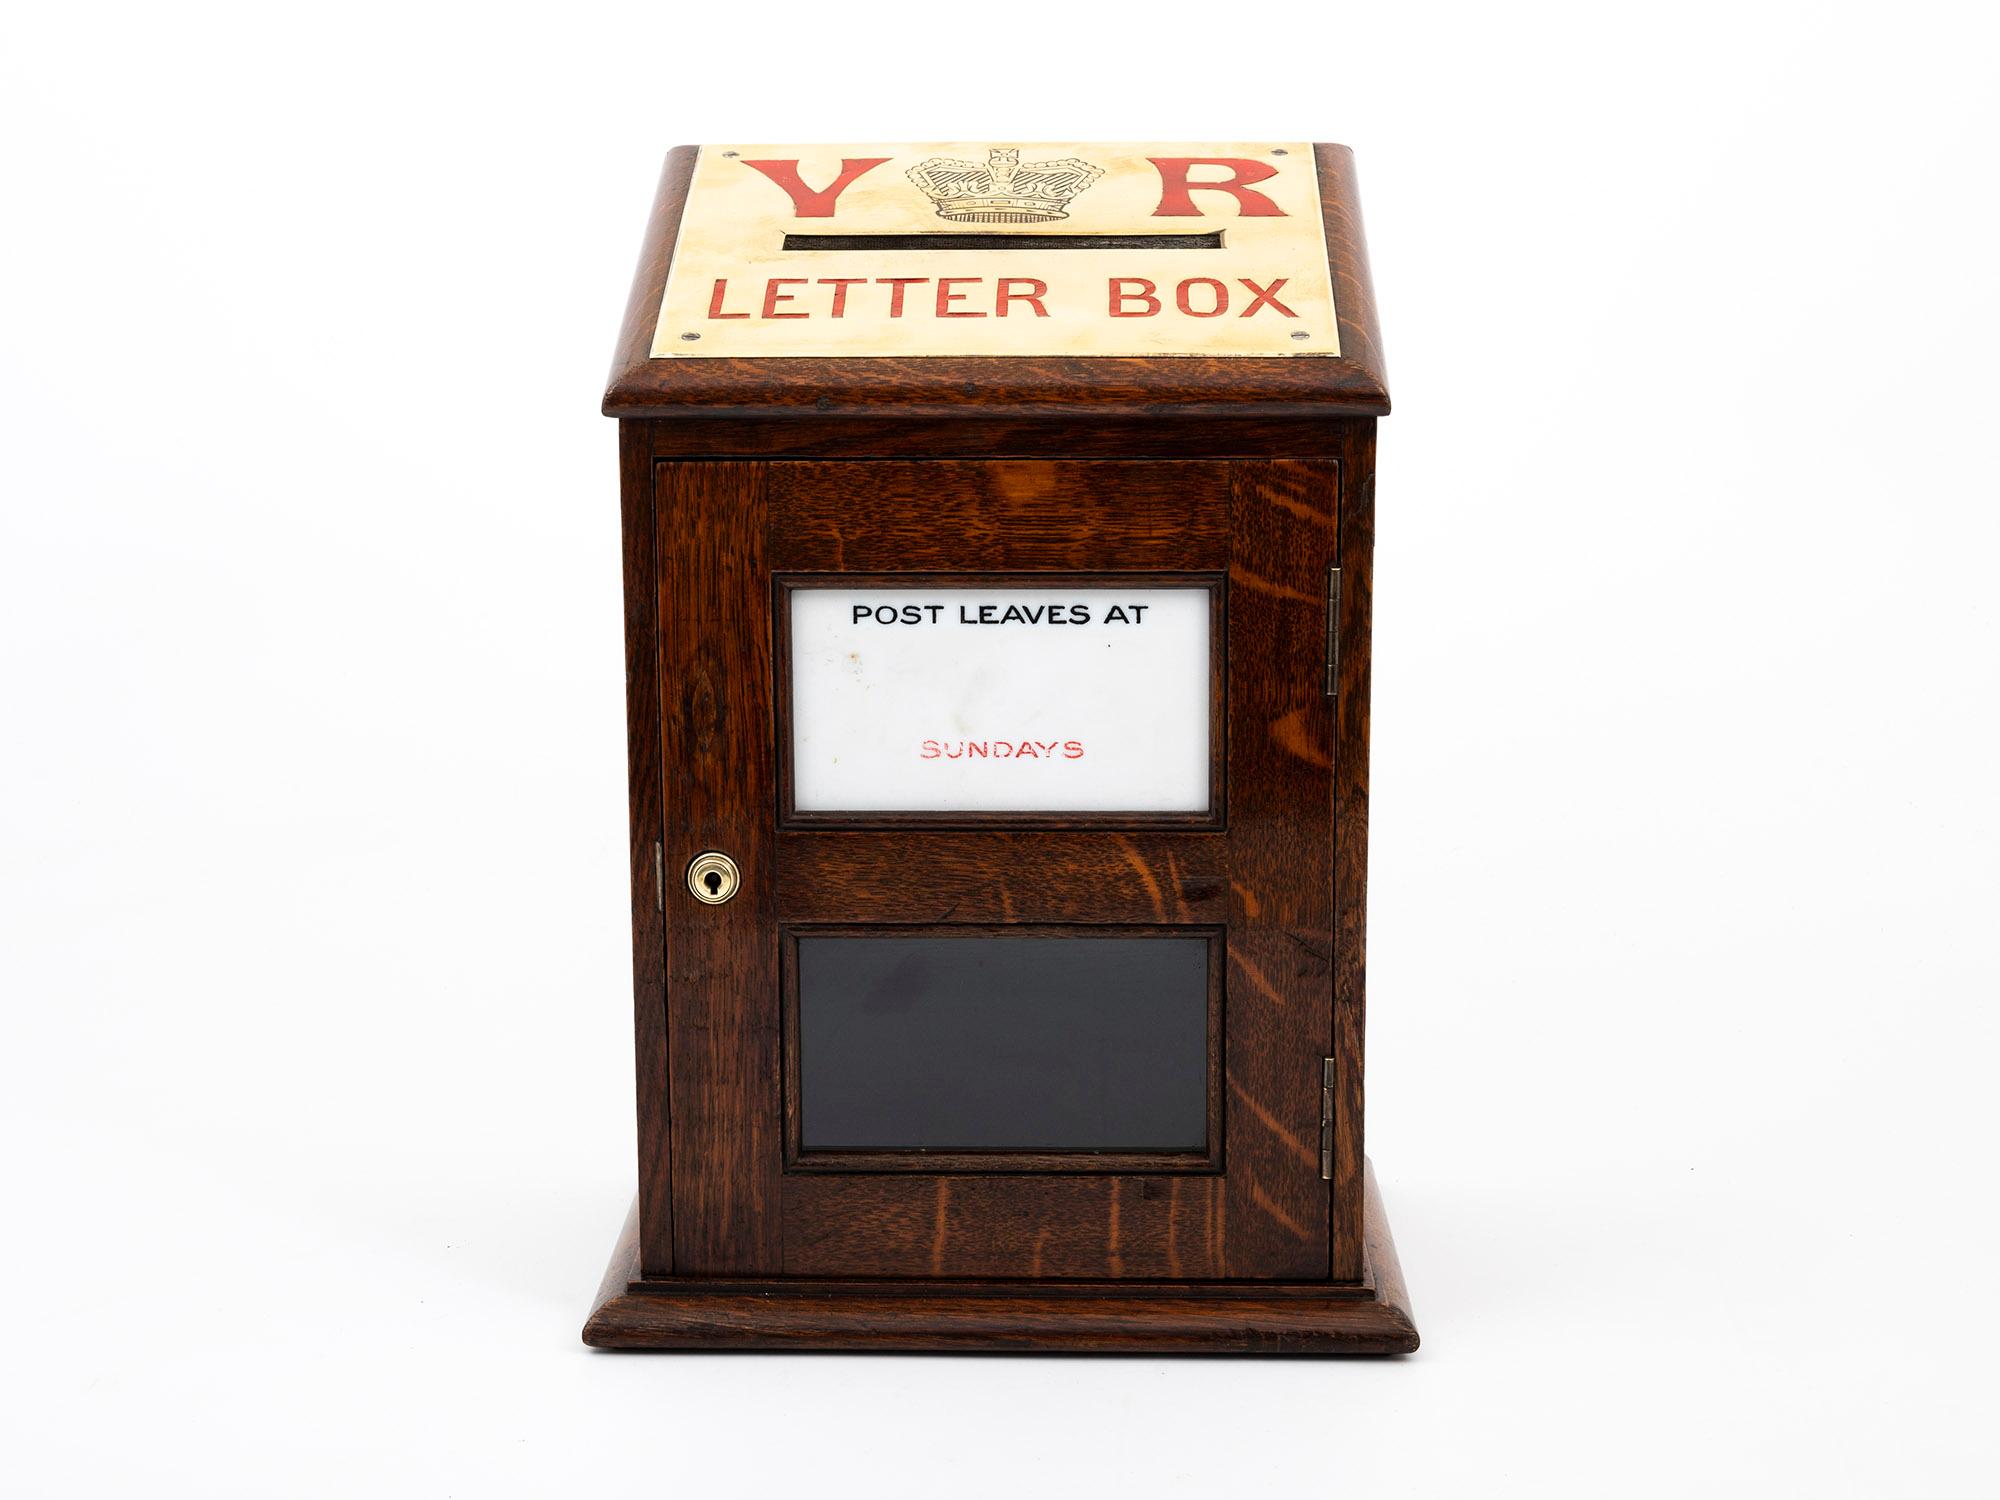 Featured here is an Antique Country House letter box by Army & Navy.

Designed beautifully and made from English Oak, this lovely Antique Country House Post Box features a large brass letter slot with red enamelled lettering. This elegant antique